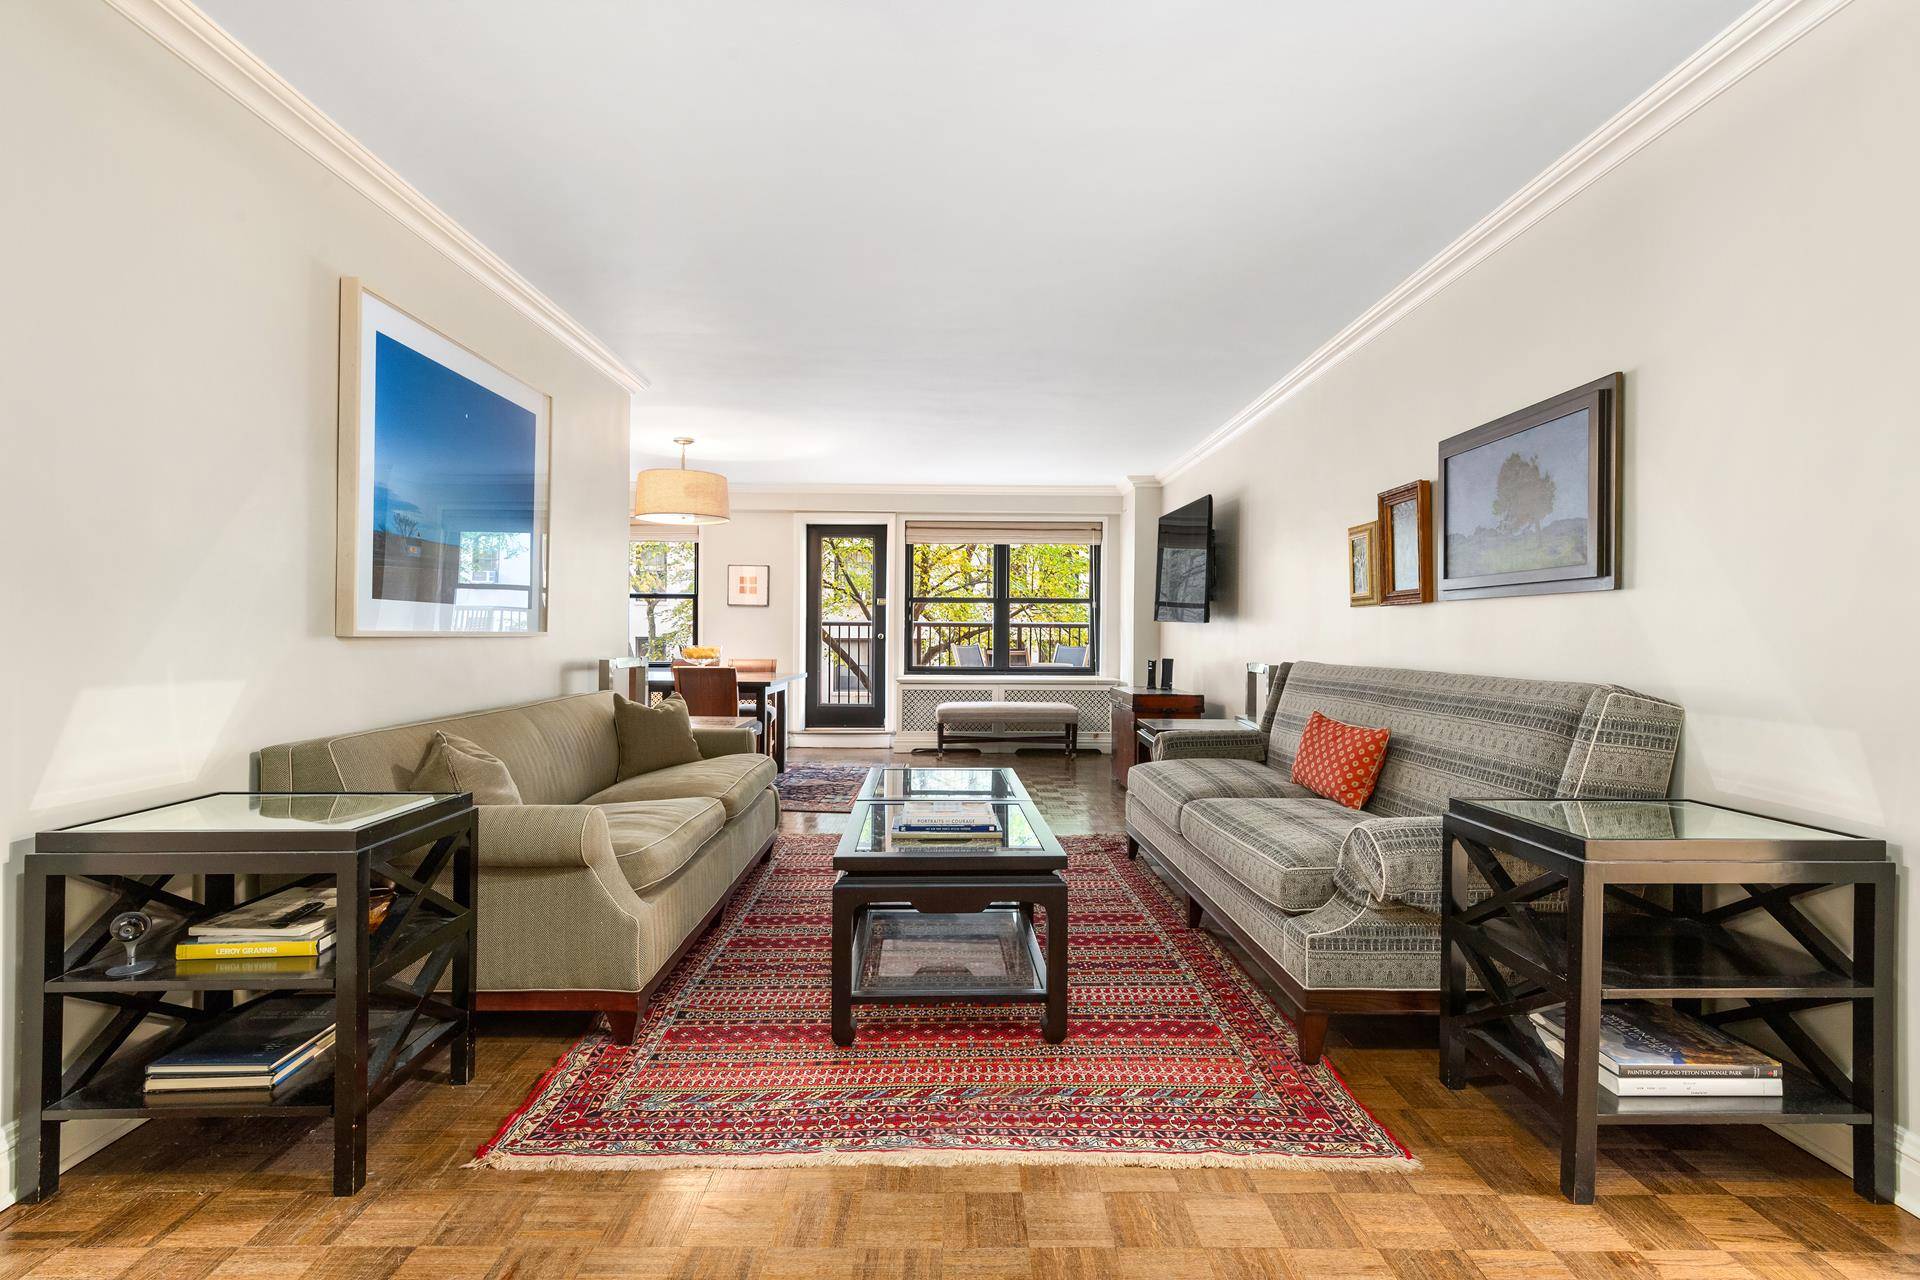 Introducing 1199 Park Avenue, 2H A fantastic 2 bedroom 2 bath residence with a private patio and south facing views over beautiful, tree lined 94th Street off Park Avenue.